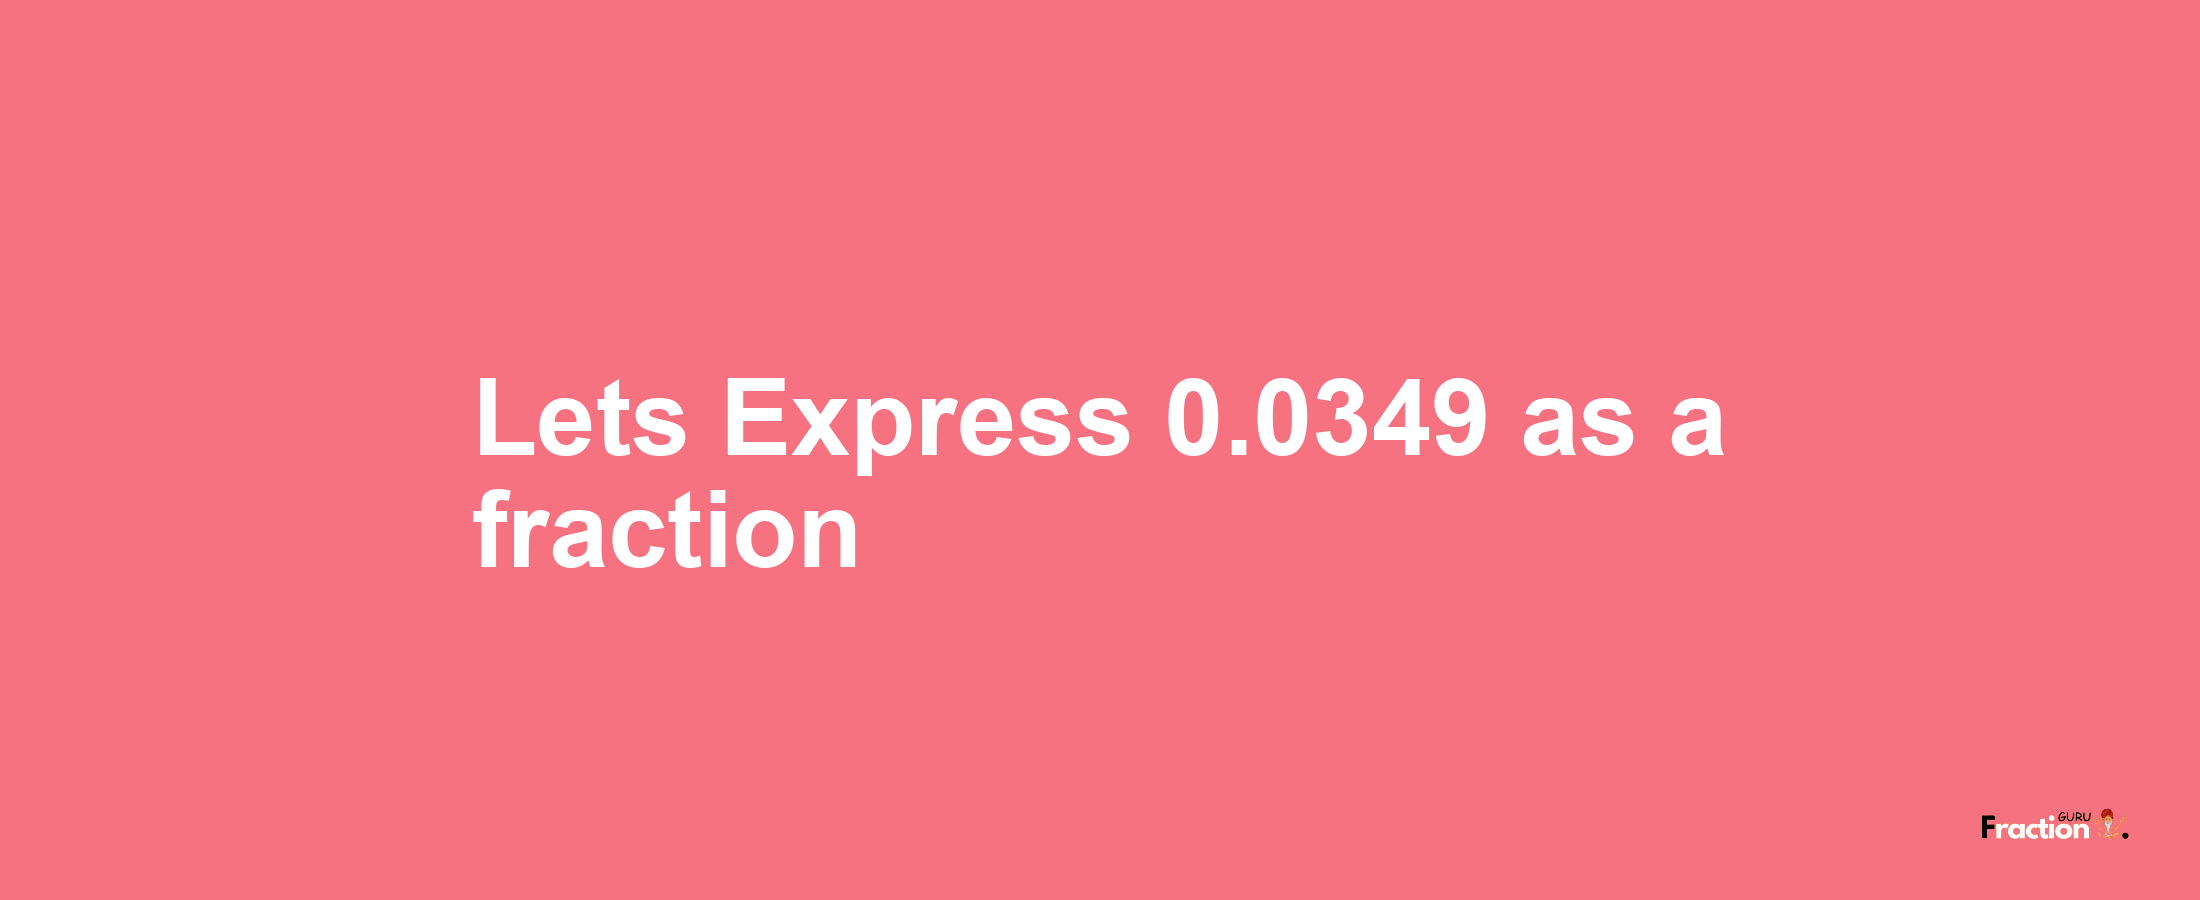 Lets Express 0.0349 as afraction